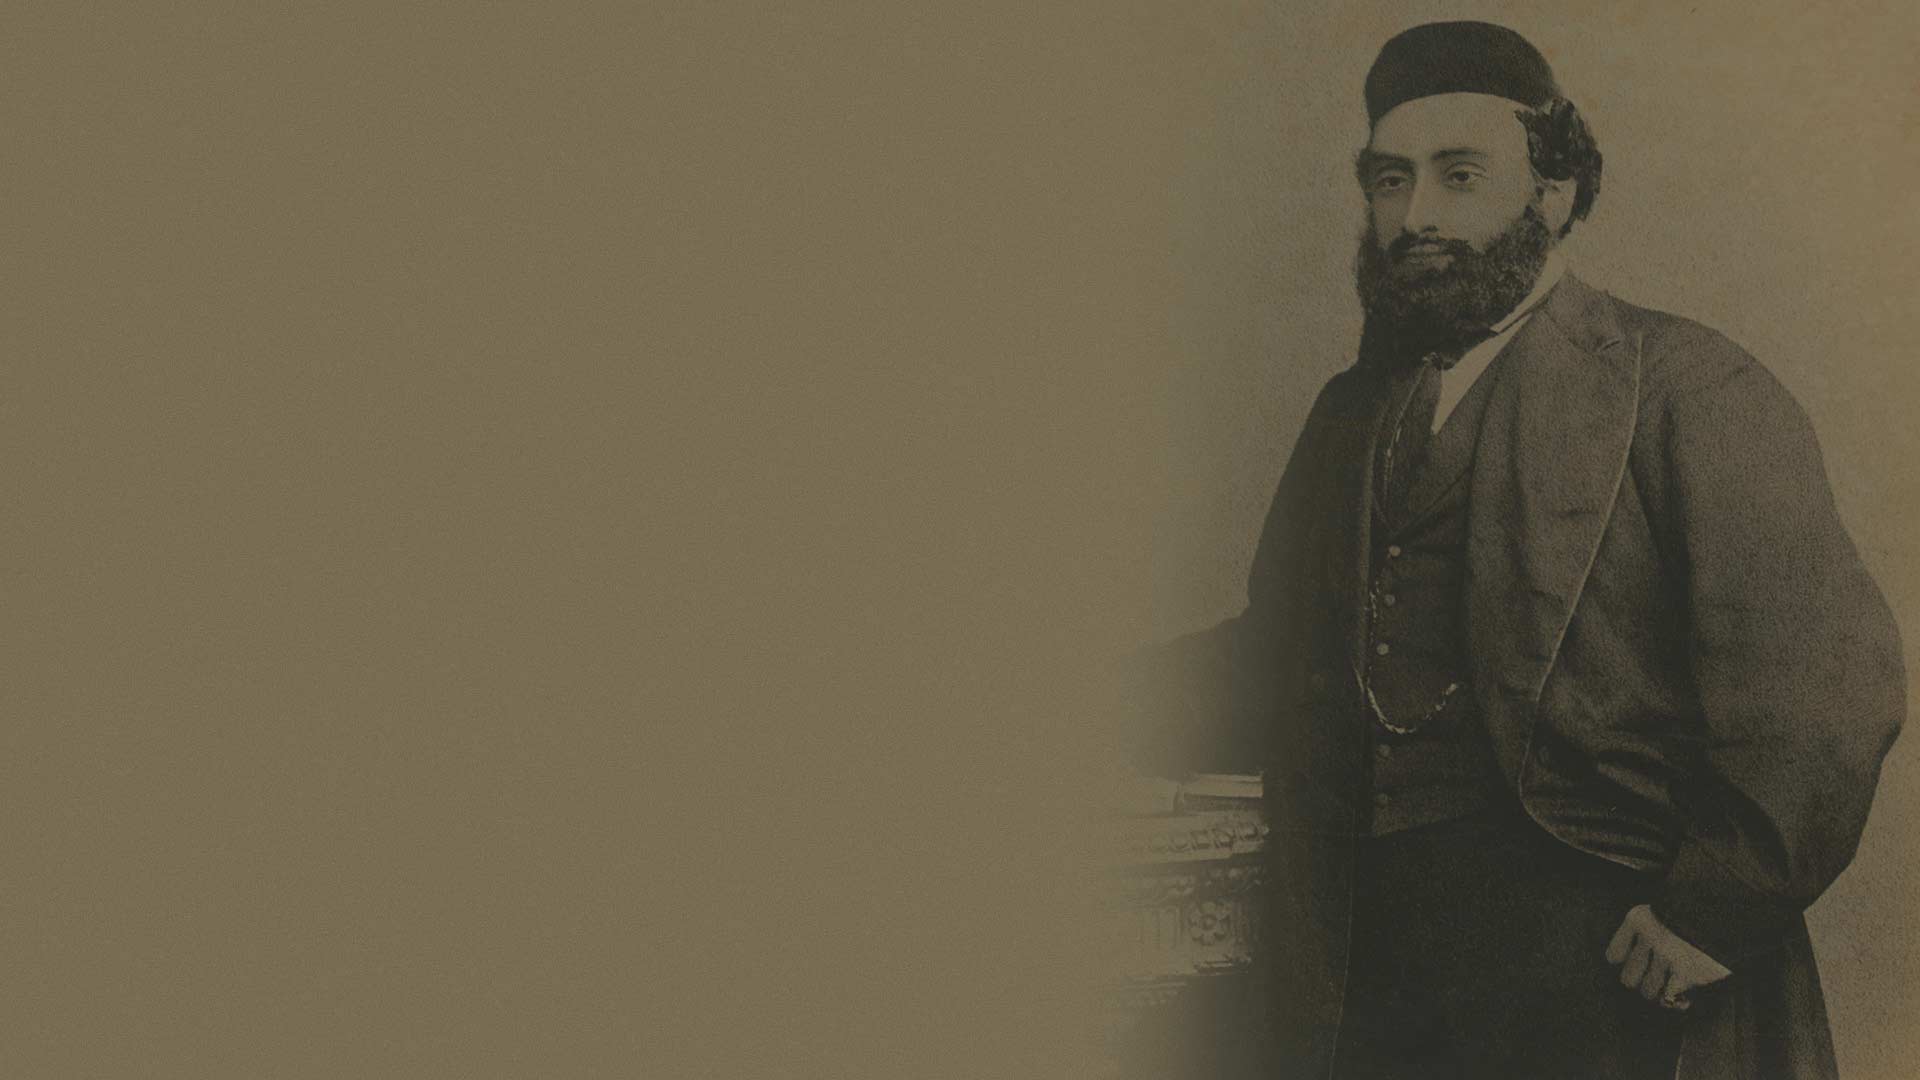 Jamsetji Tata started his first trading firm in 1868